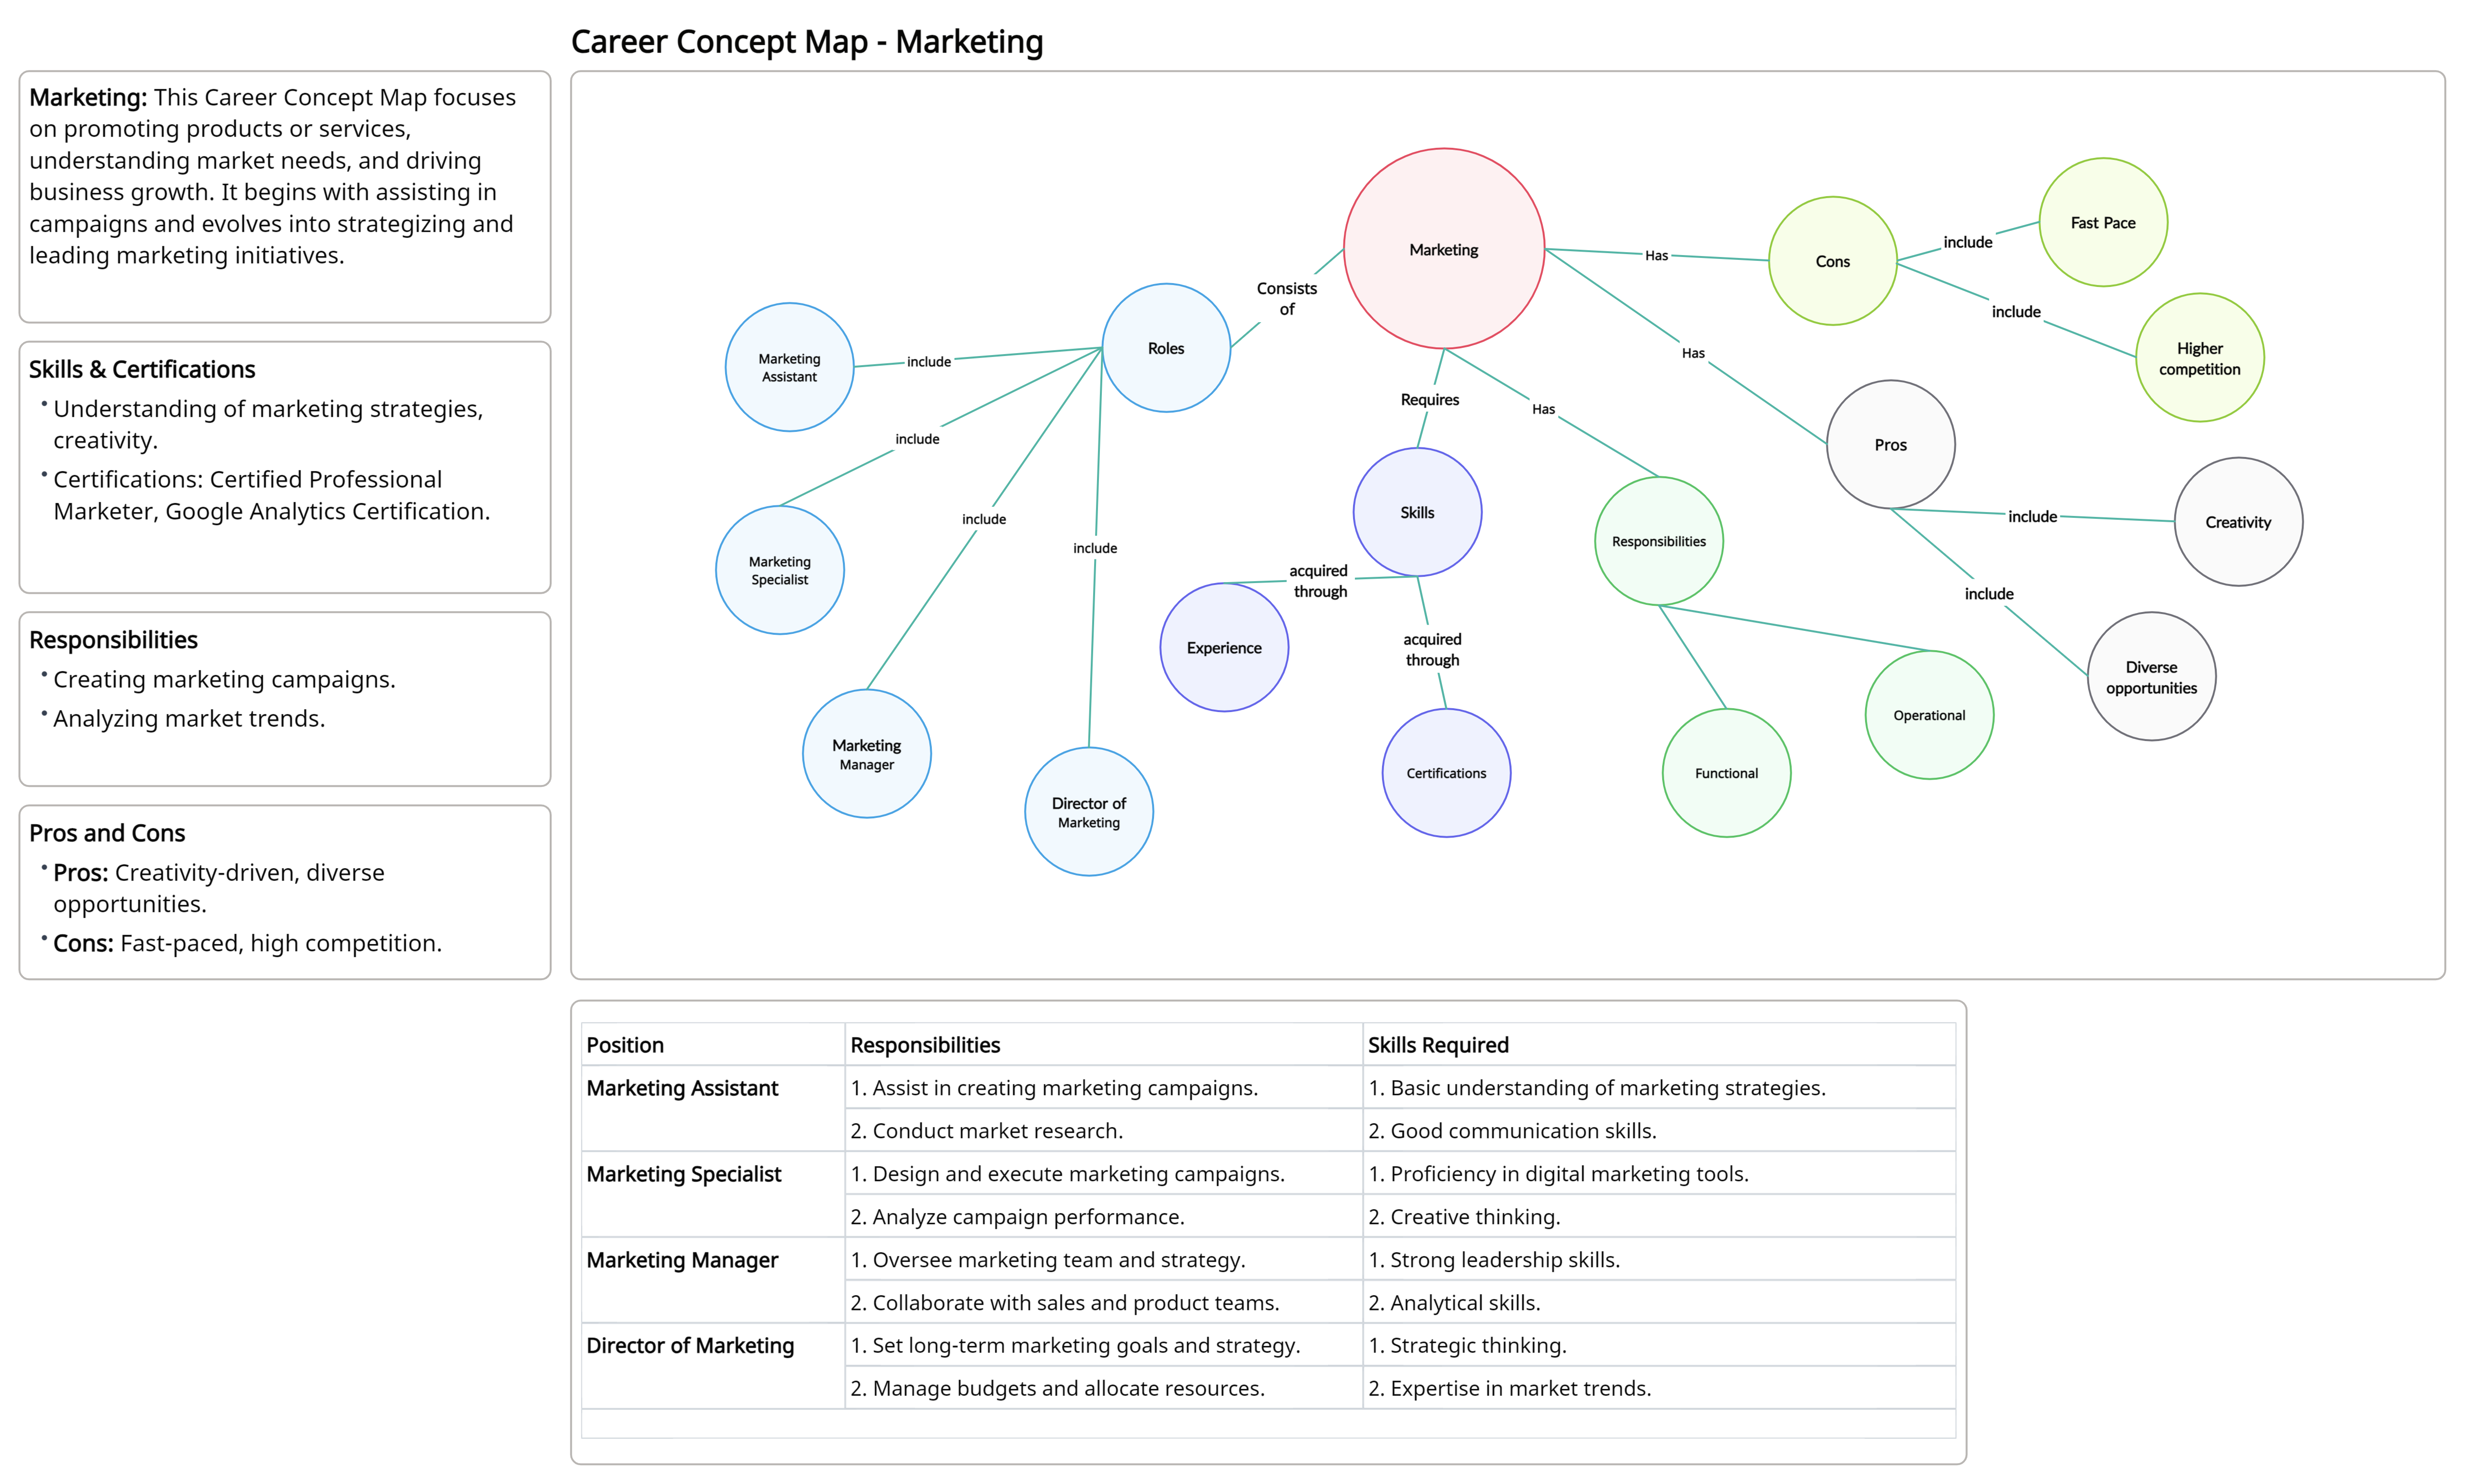 Marketing Career Concept Map